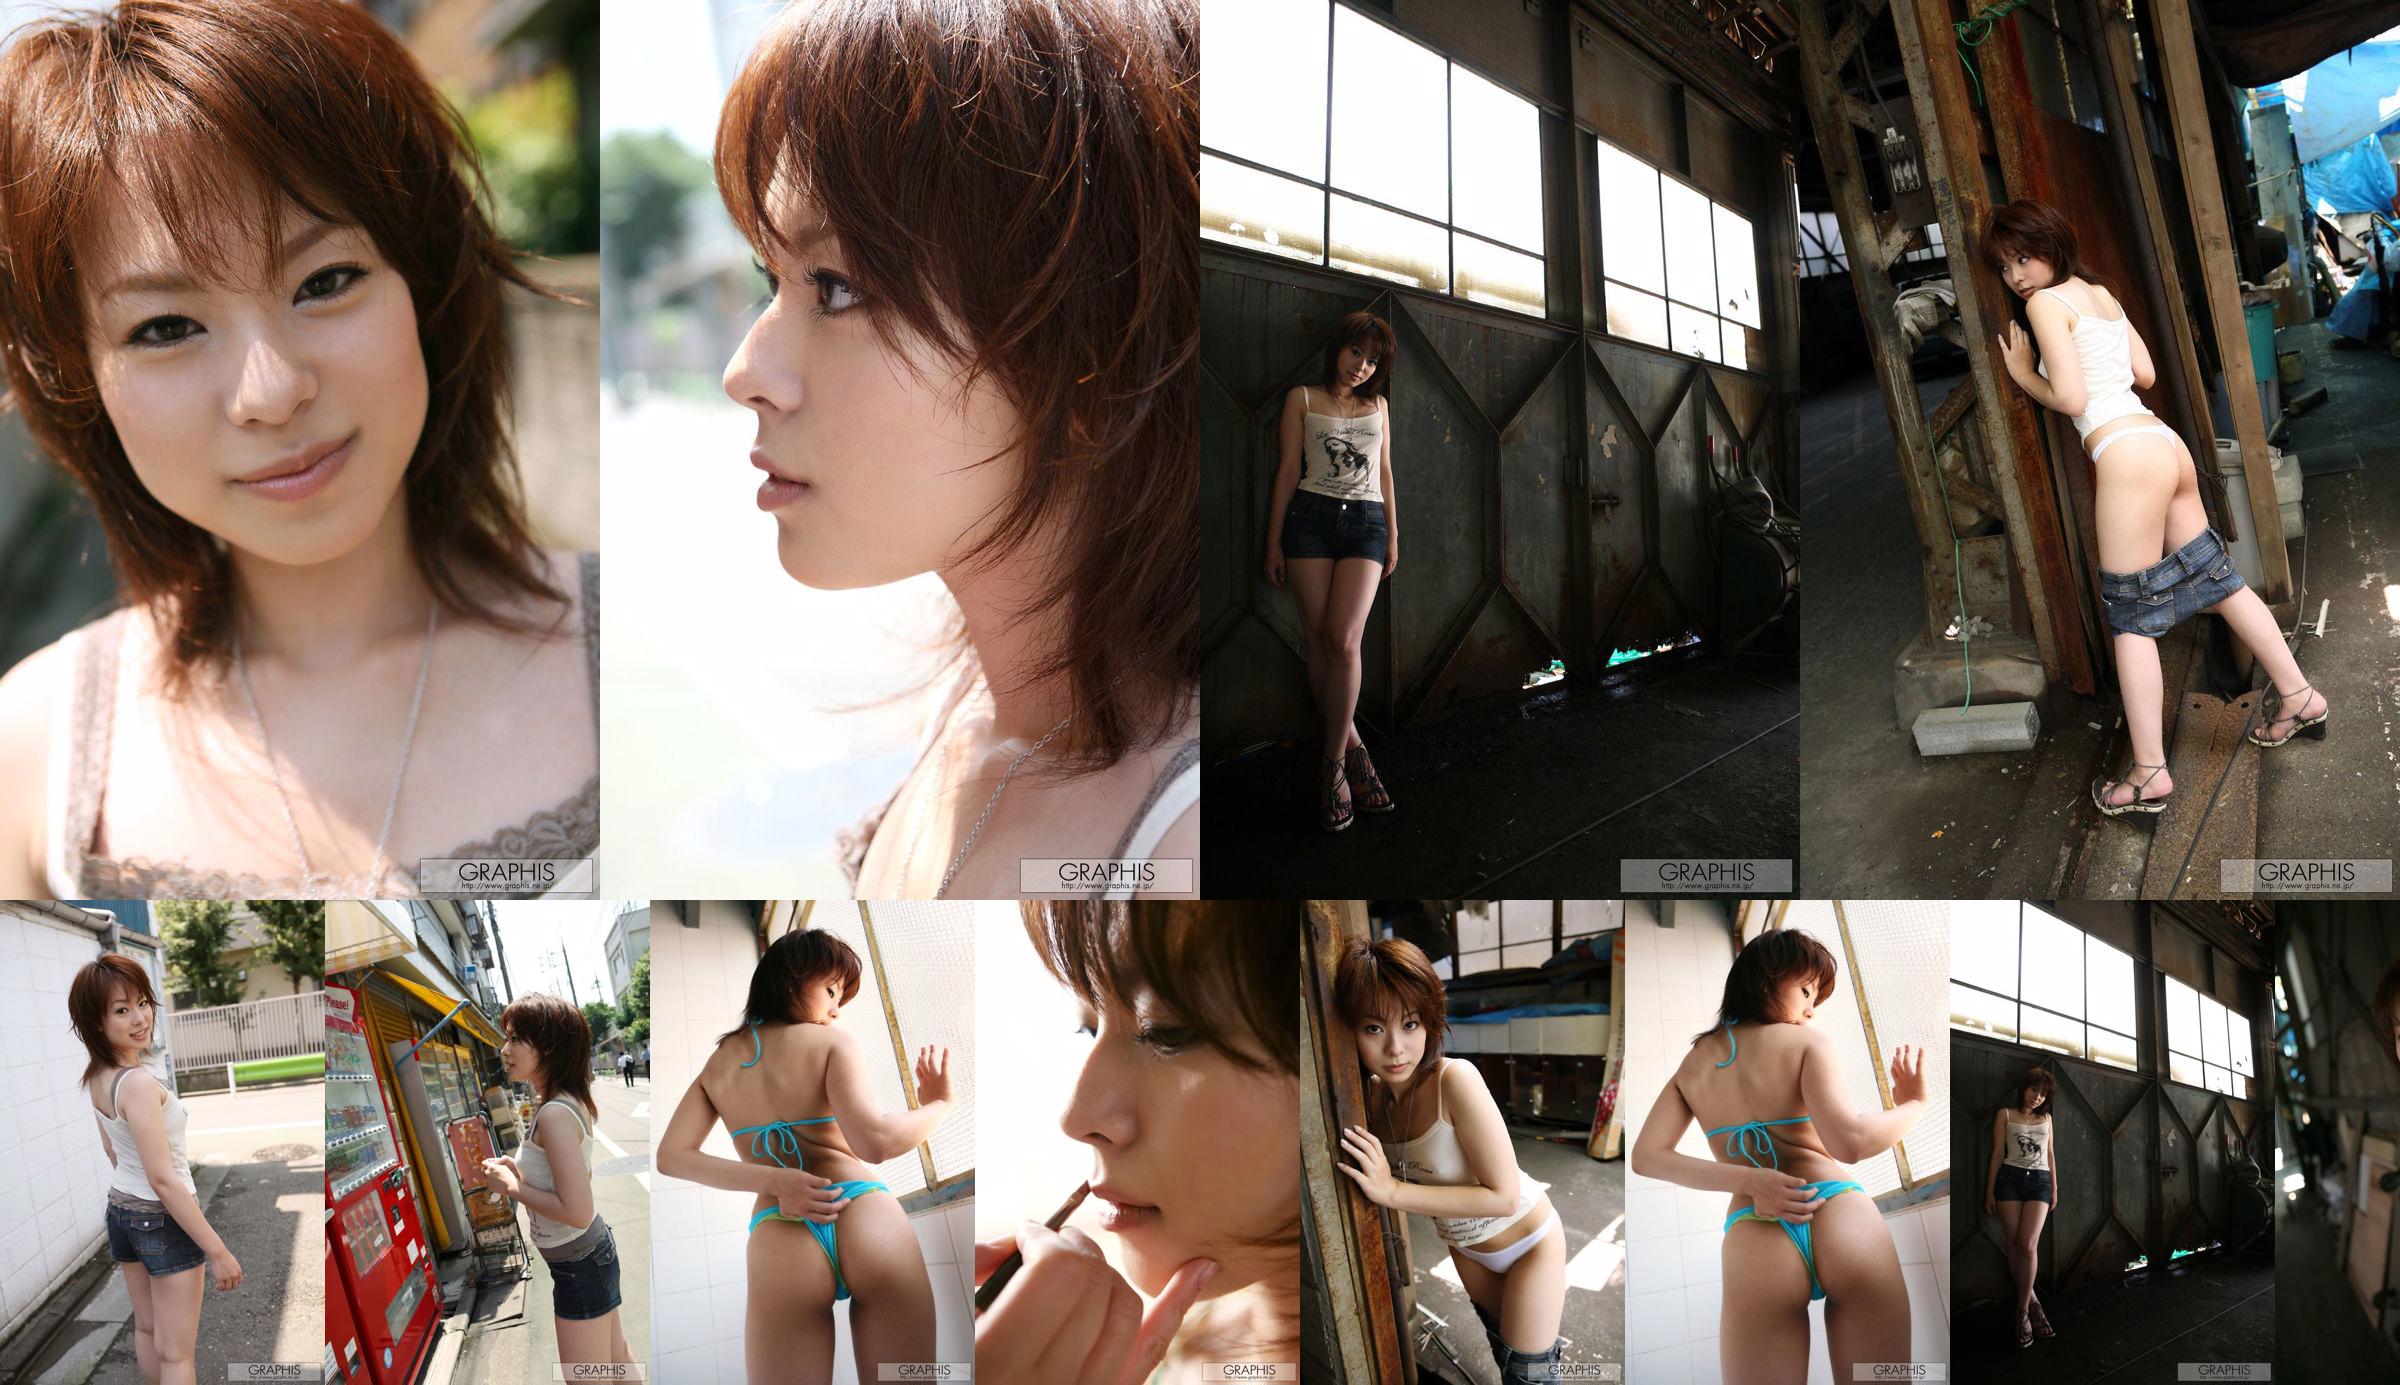 Mina Manabe Mina Manabe [Graphis] First Gravure First Take Off Daughter No.539ac9 Pagina 2